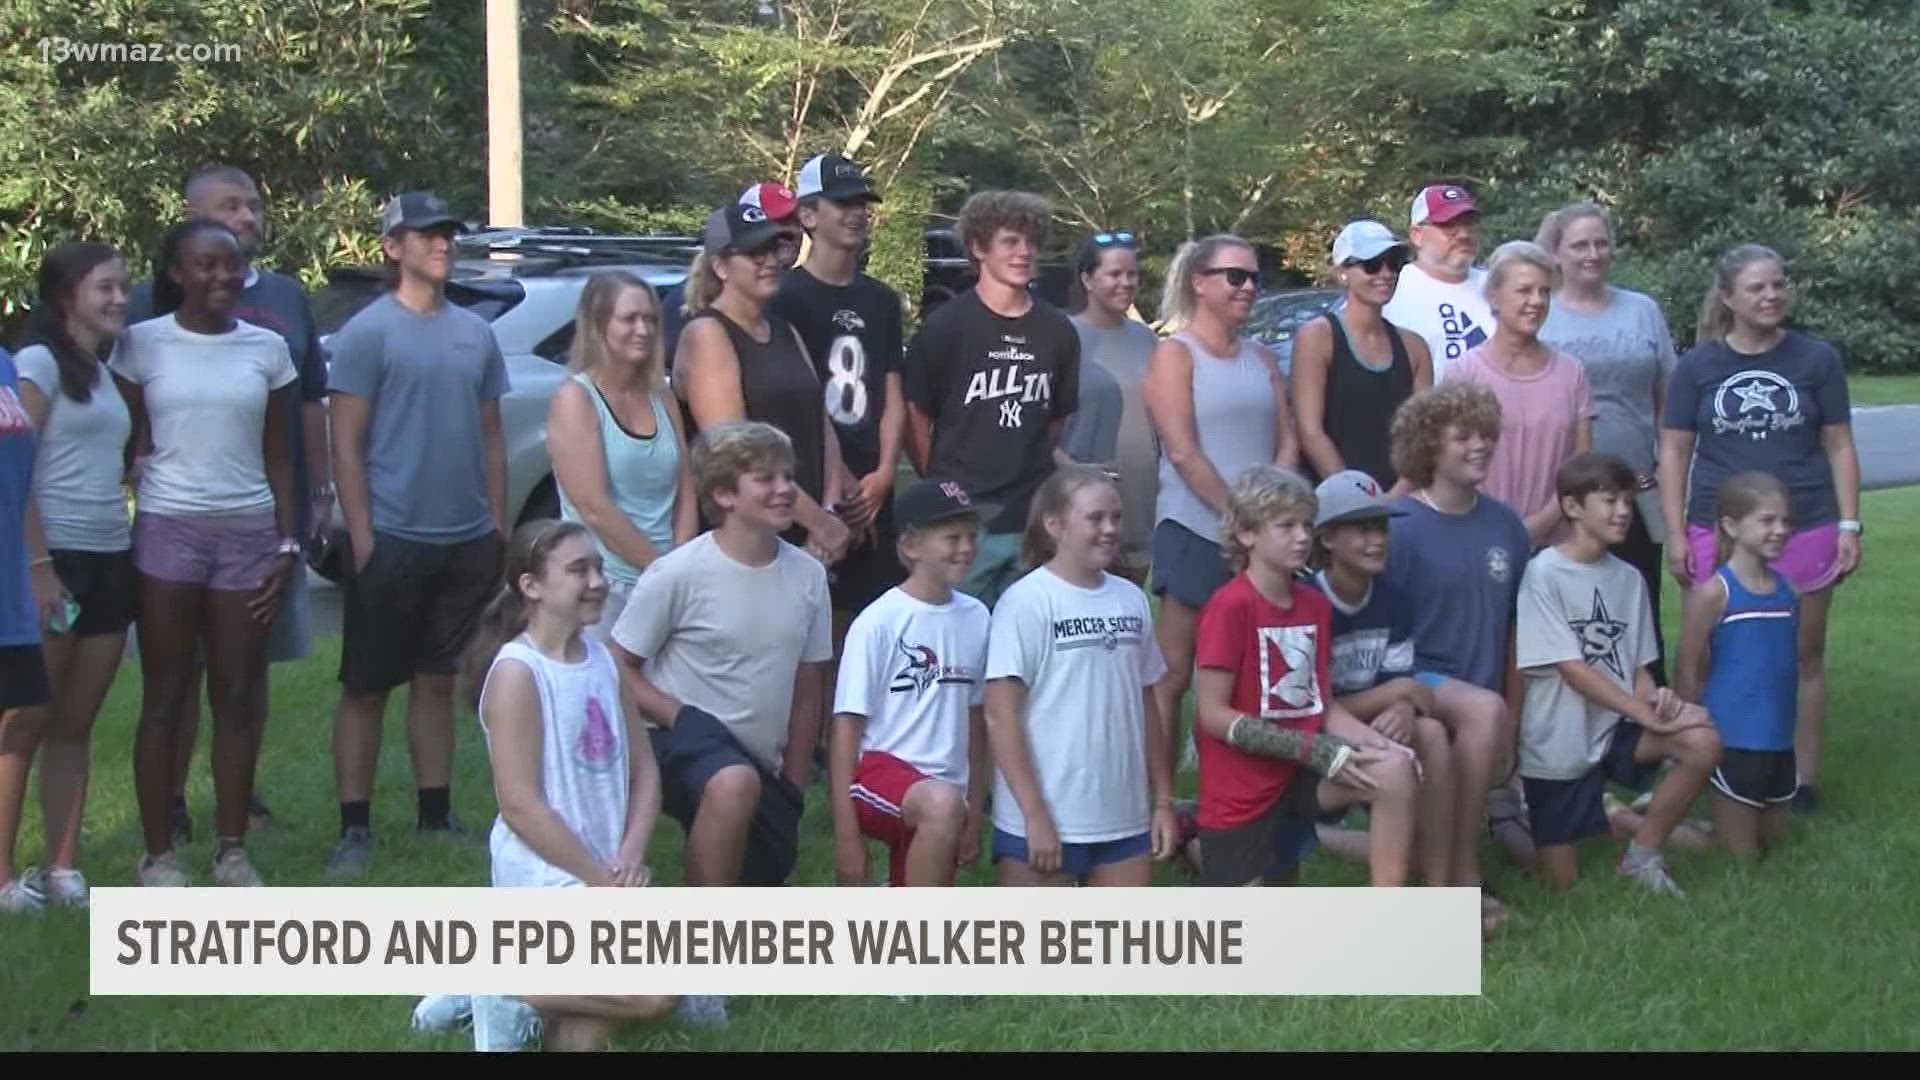 Stratford and FPD students gathered Saturday to run as one in remembrance of Bethune